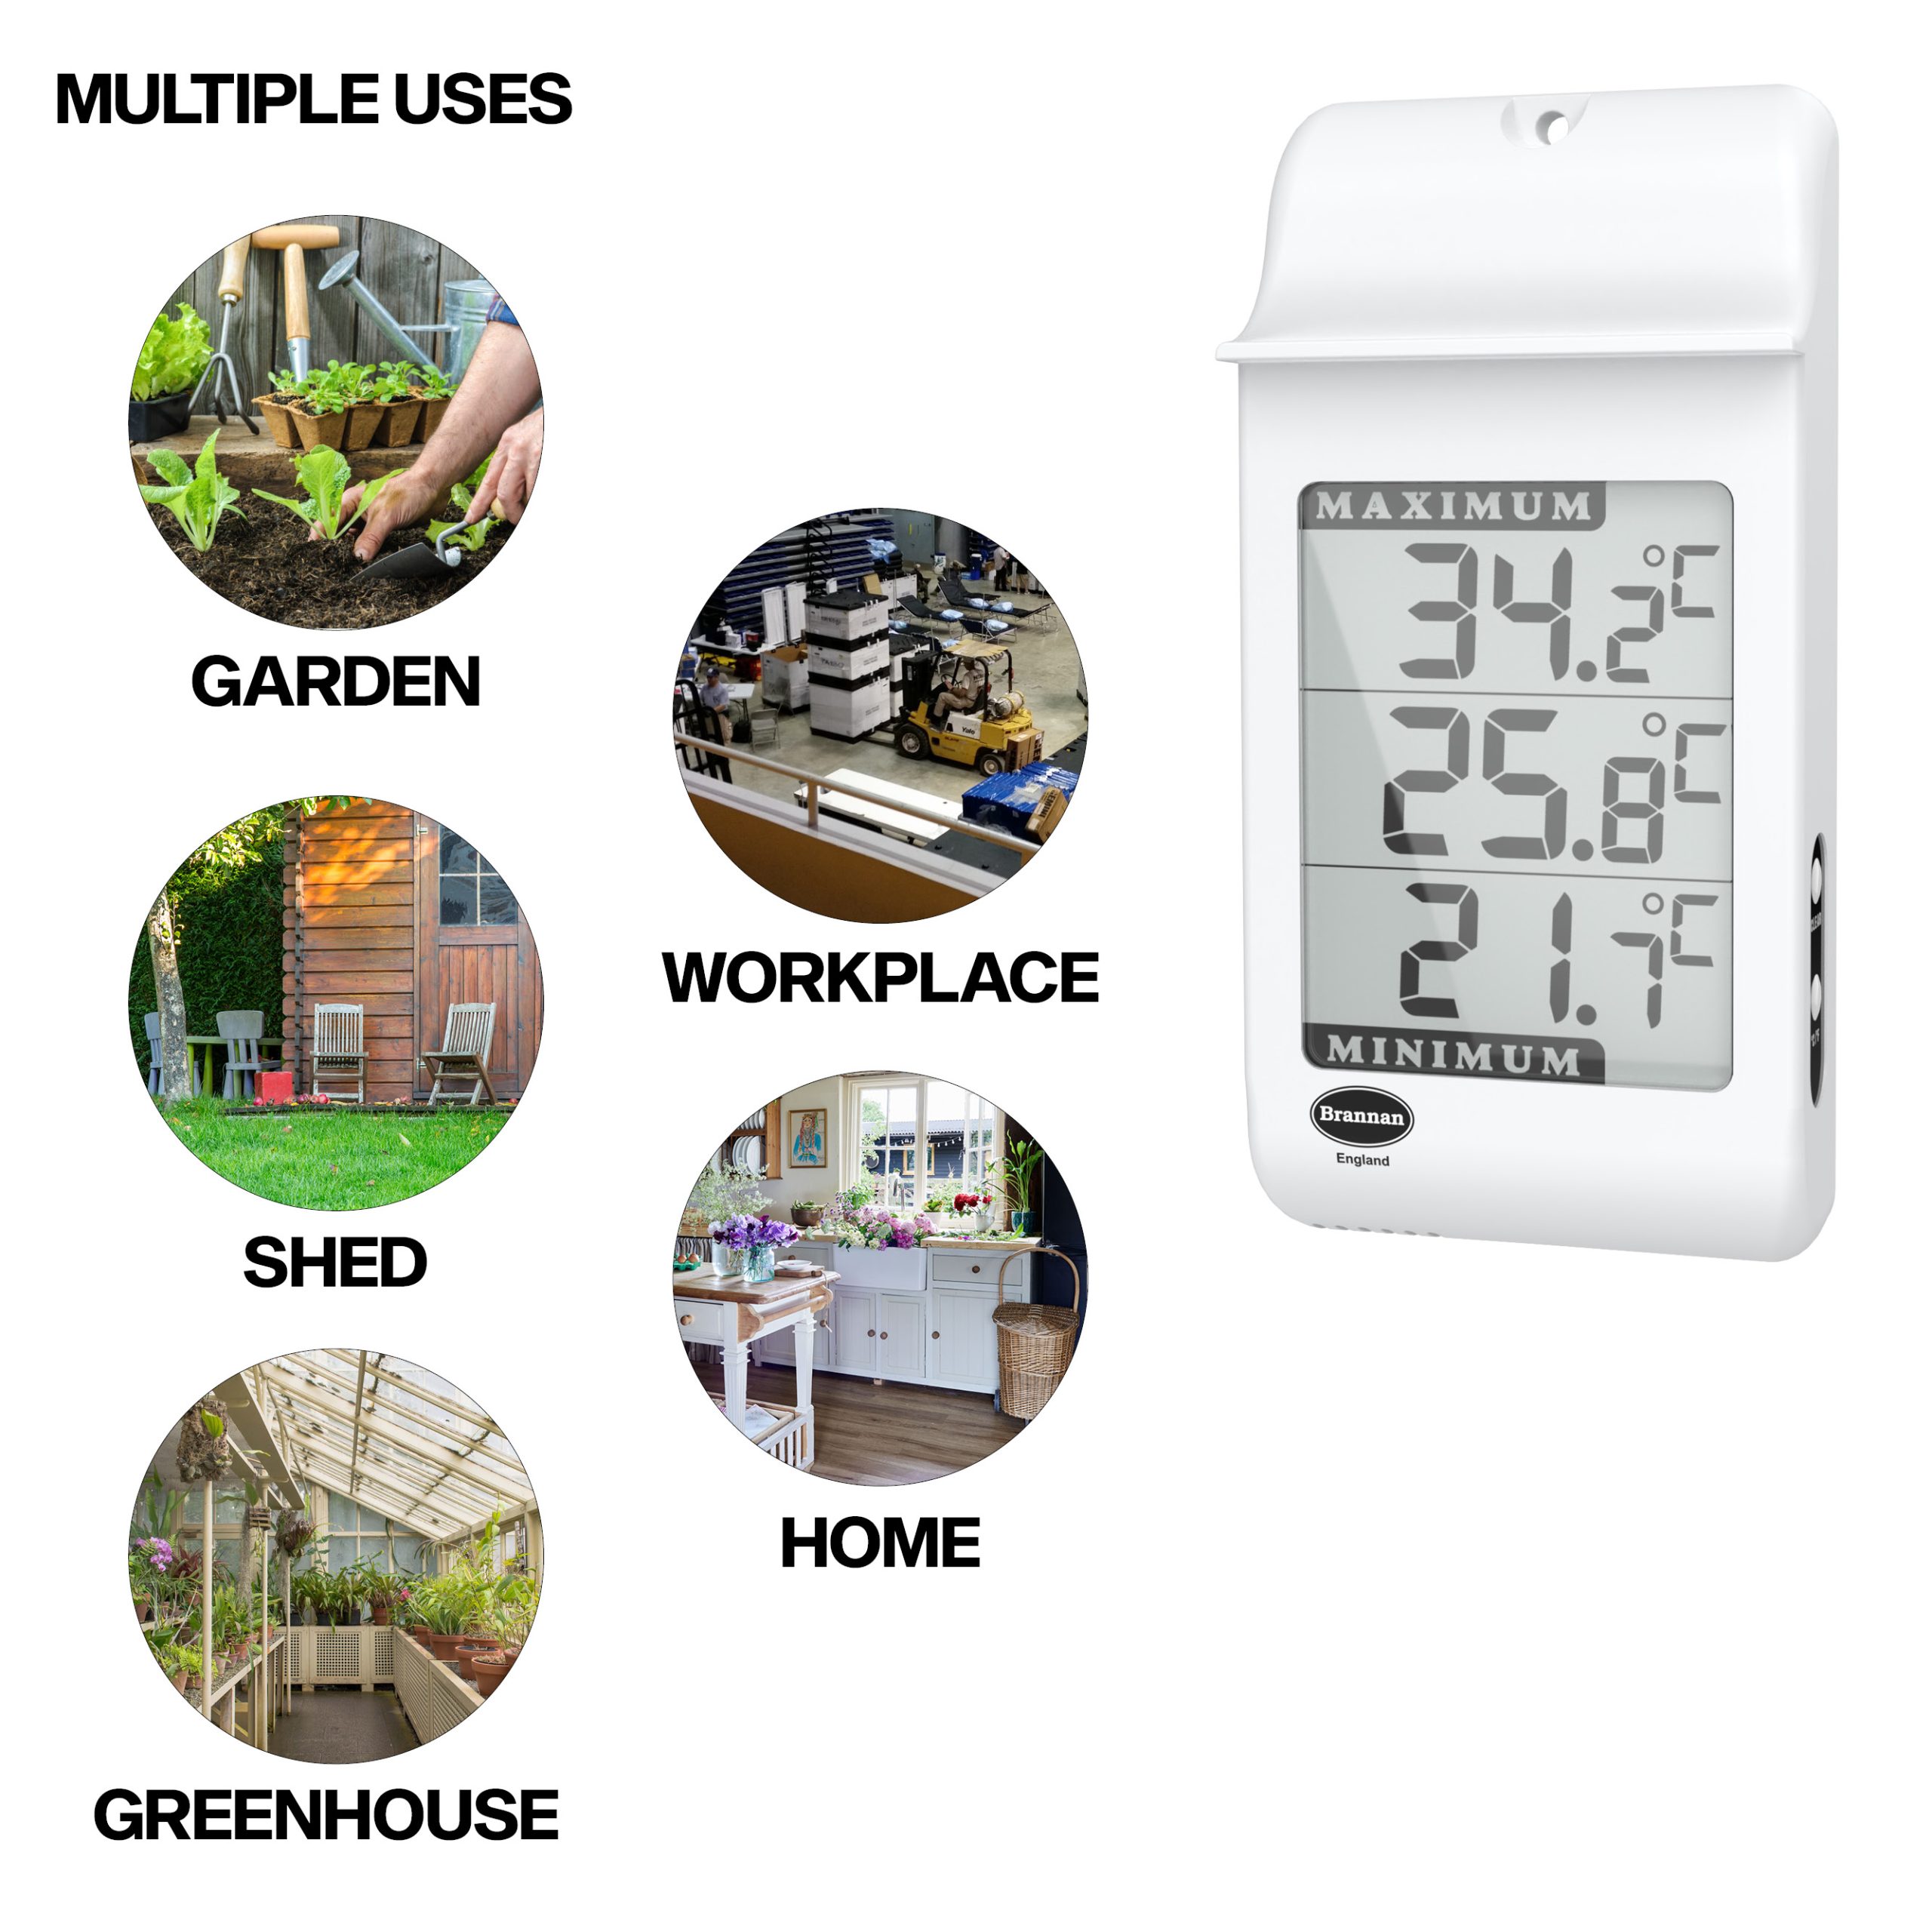 S. Brannan & Sons Digital Greenhouse Thermometer - Max Min Thermometer for Greenhouse or Garden Maximum and Minimum Temperatures Indoor Outdoor